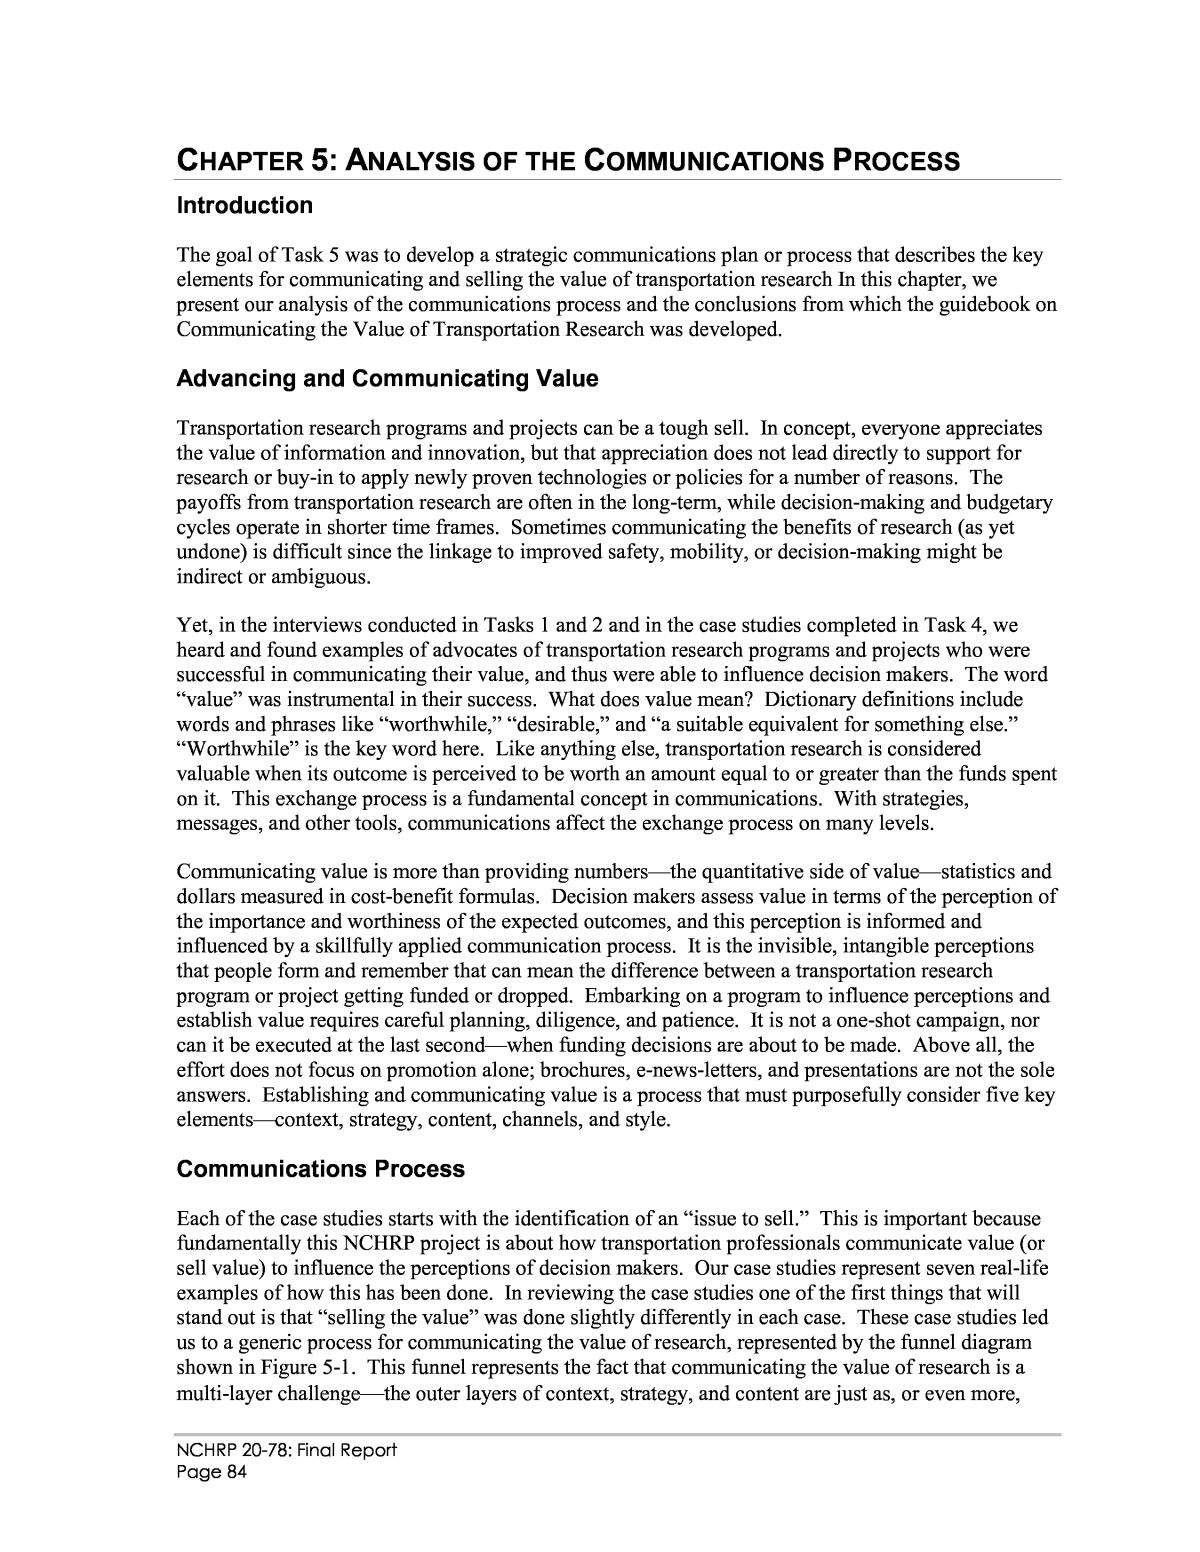 write a research on communications in organizations